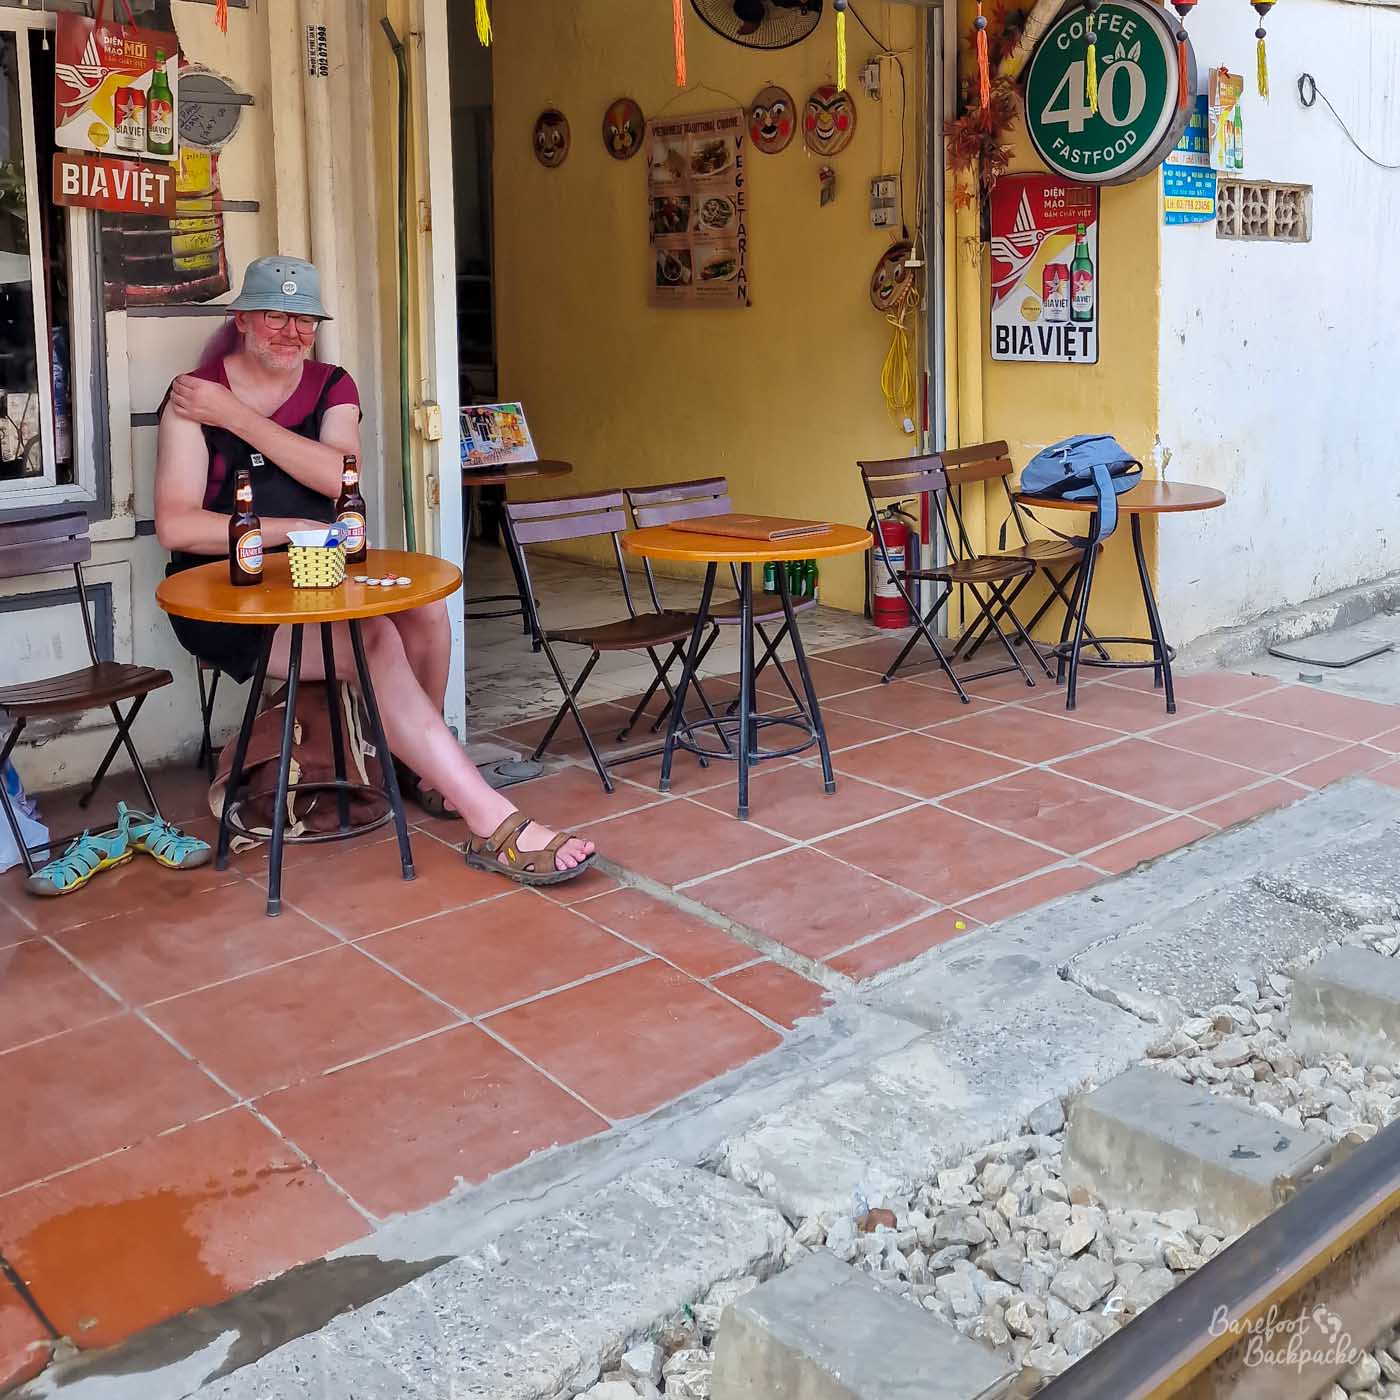 Someone is sat on a stool by a small table in front of a cafe. The walls of the cafe are plain and covered with posters for Vietnamese beer.